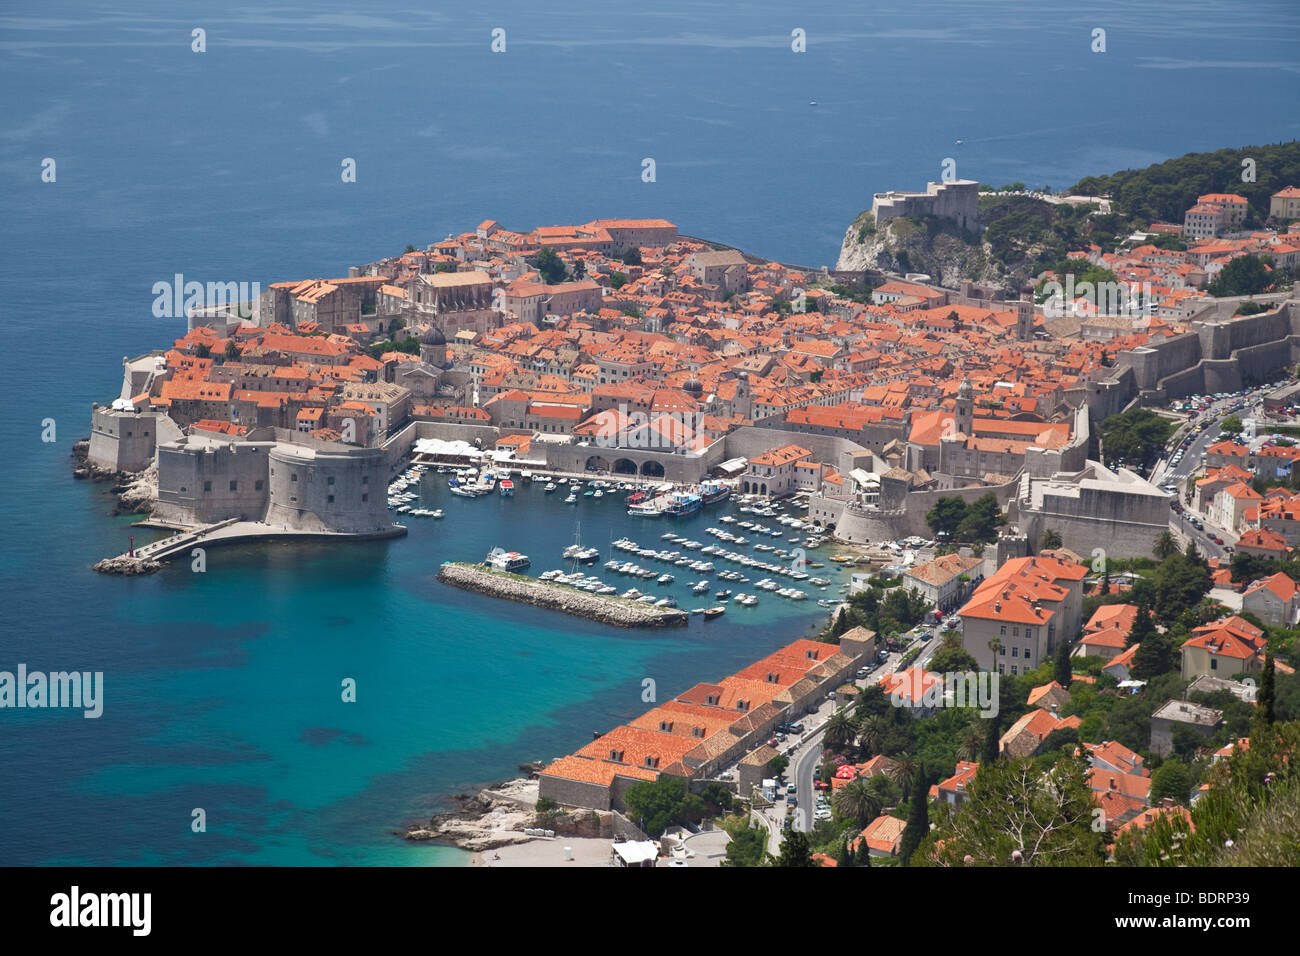 The Old Town of Dubrovnik in Croatia with the harbor and marina and looking across the roof tops of  the old town Stock Photo